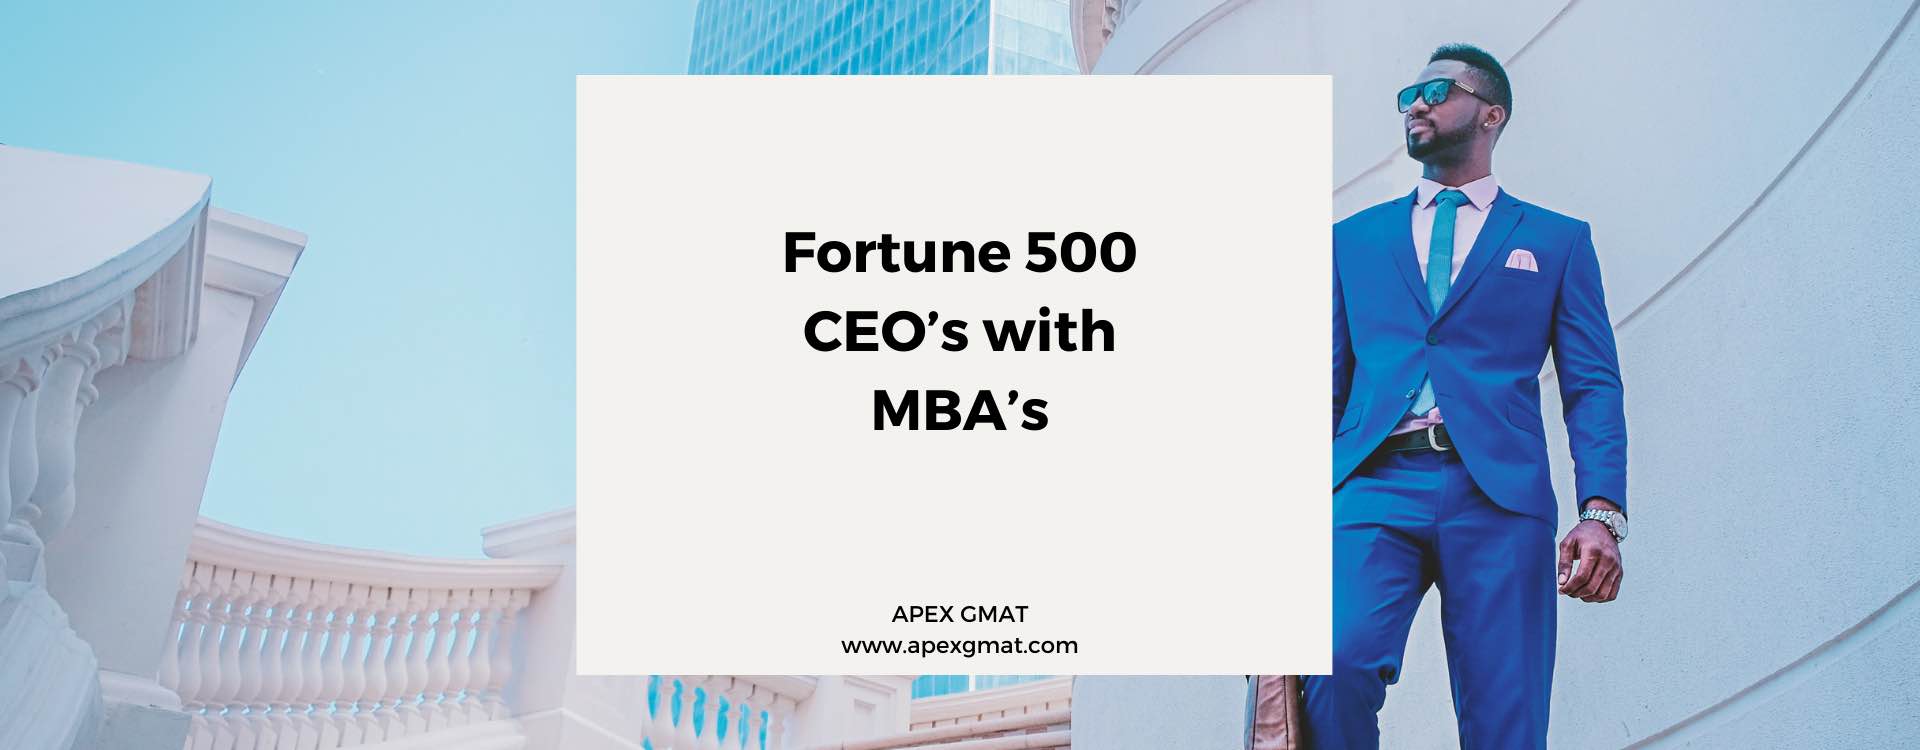 Fortune 500 CEO’s with MBA’s